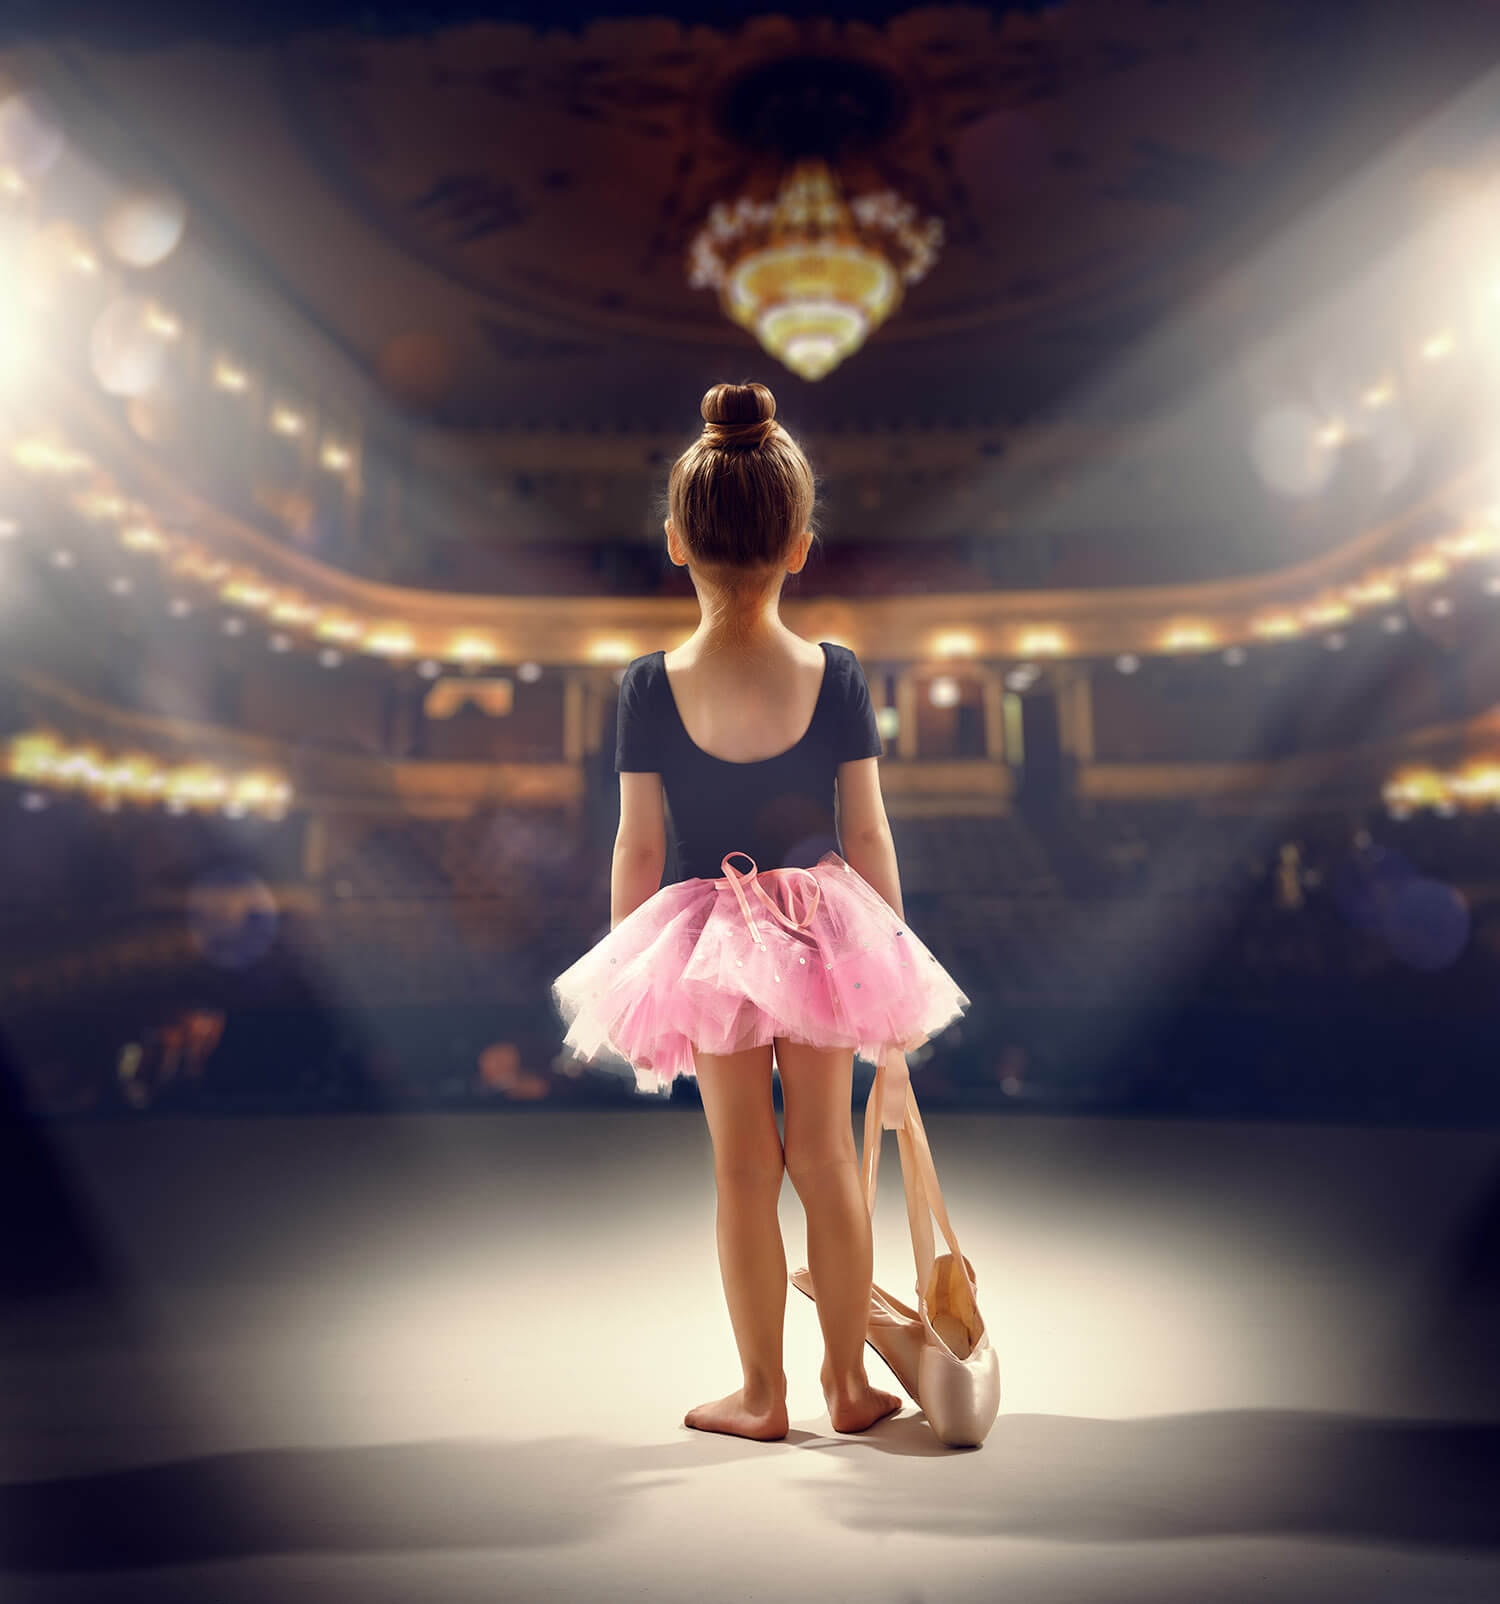 Parent and Child Ballet – Can Toddlers Dance?